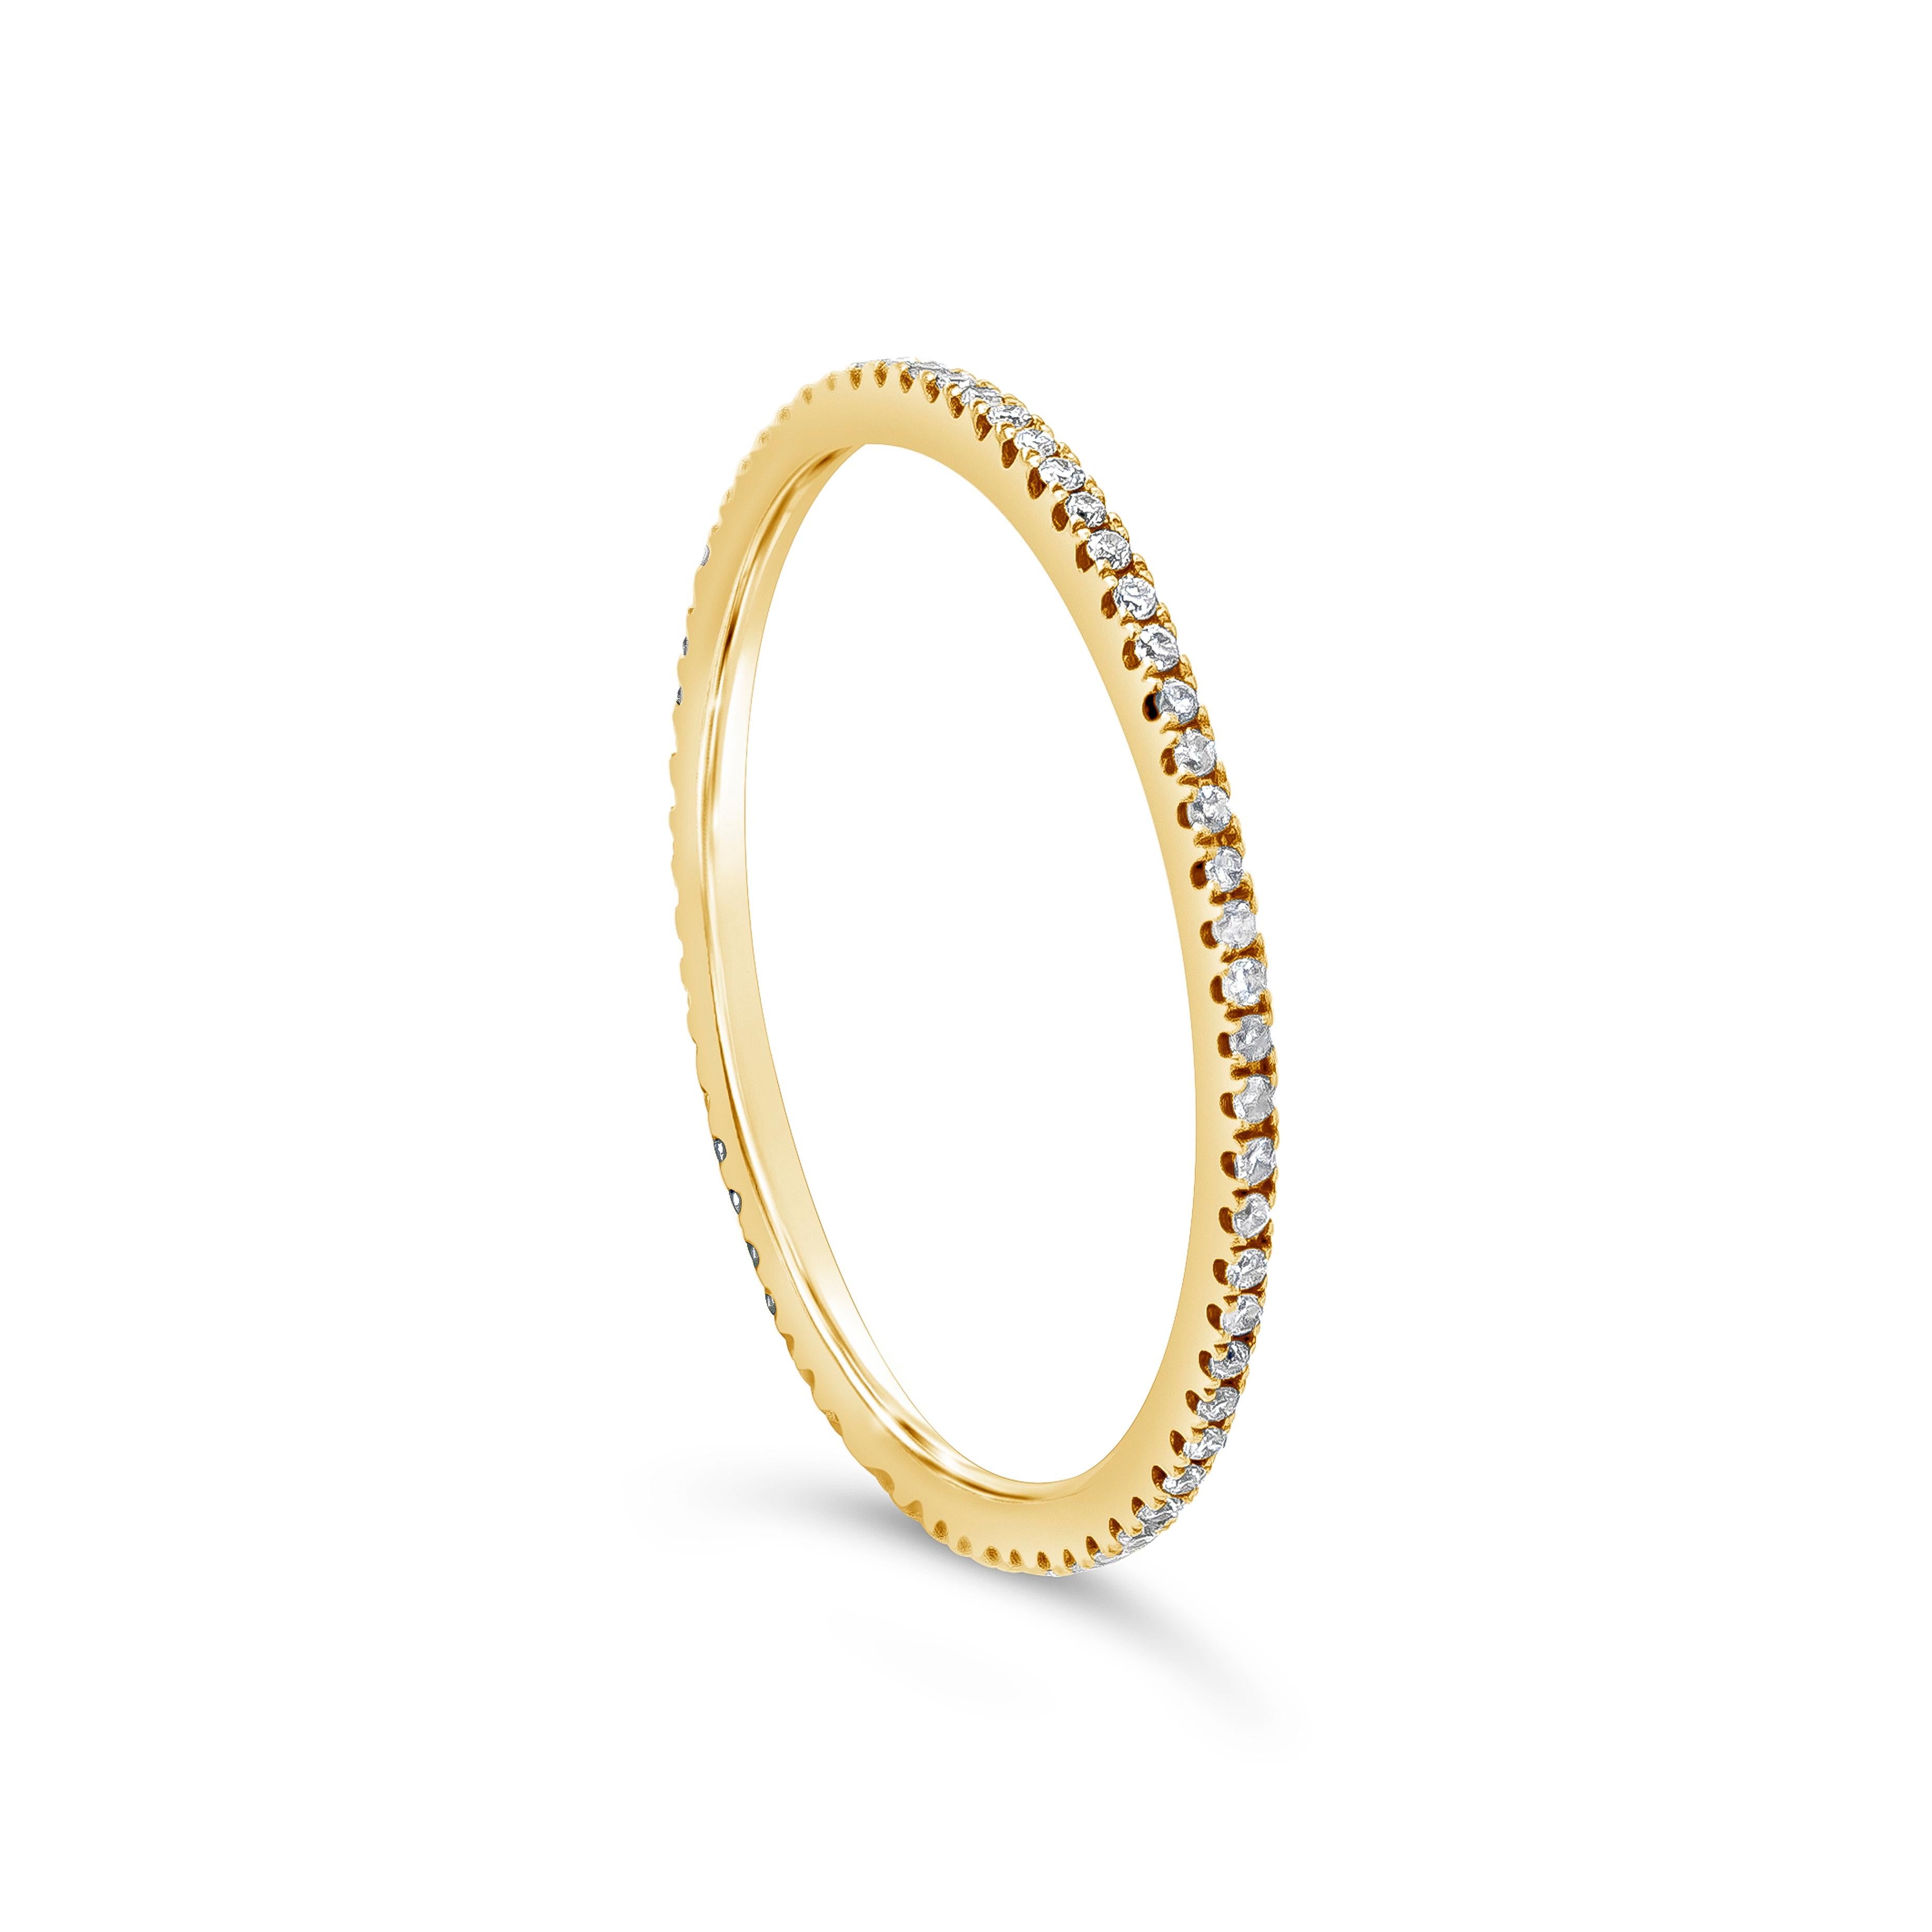 A simple eternity wedding band, showcasing a row of round melee diamonds weighing 0.14 carat total. Made with 18K yellow gold. Size 7.25 US. Perfect as a spacer between an engagement ring and a wedding band.

Roman Malakov is a custom house,